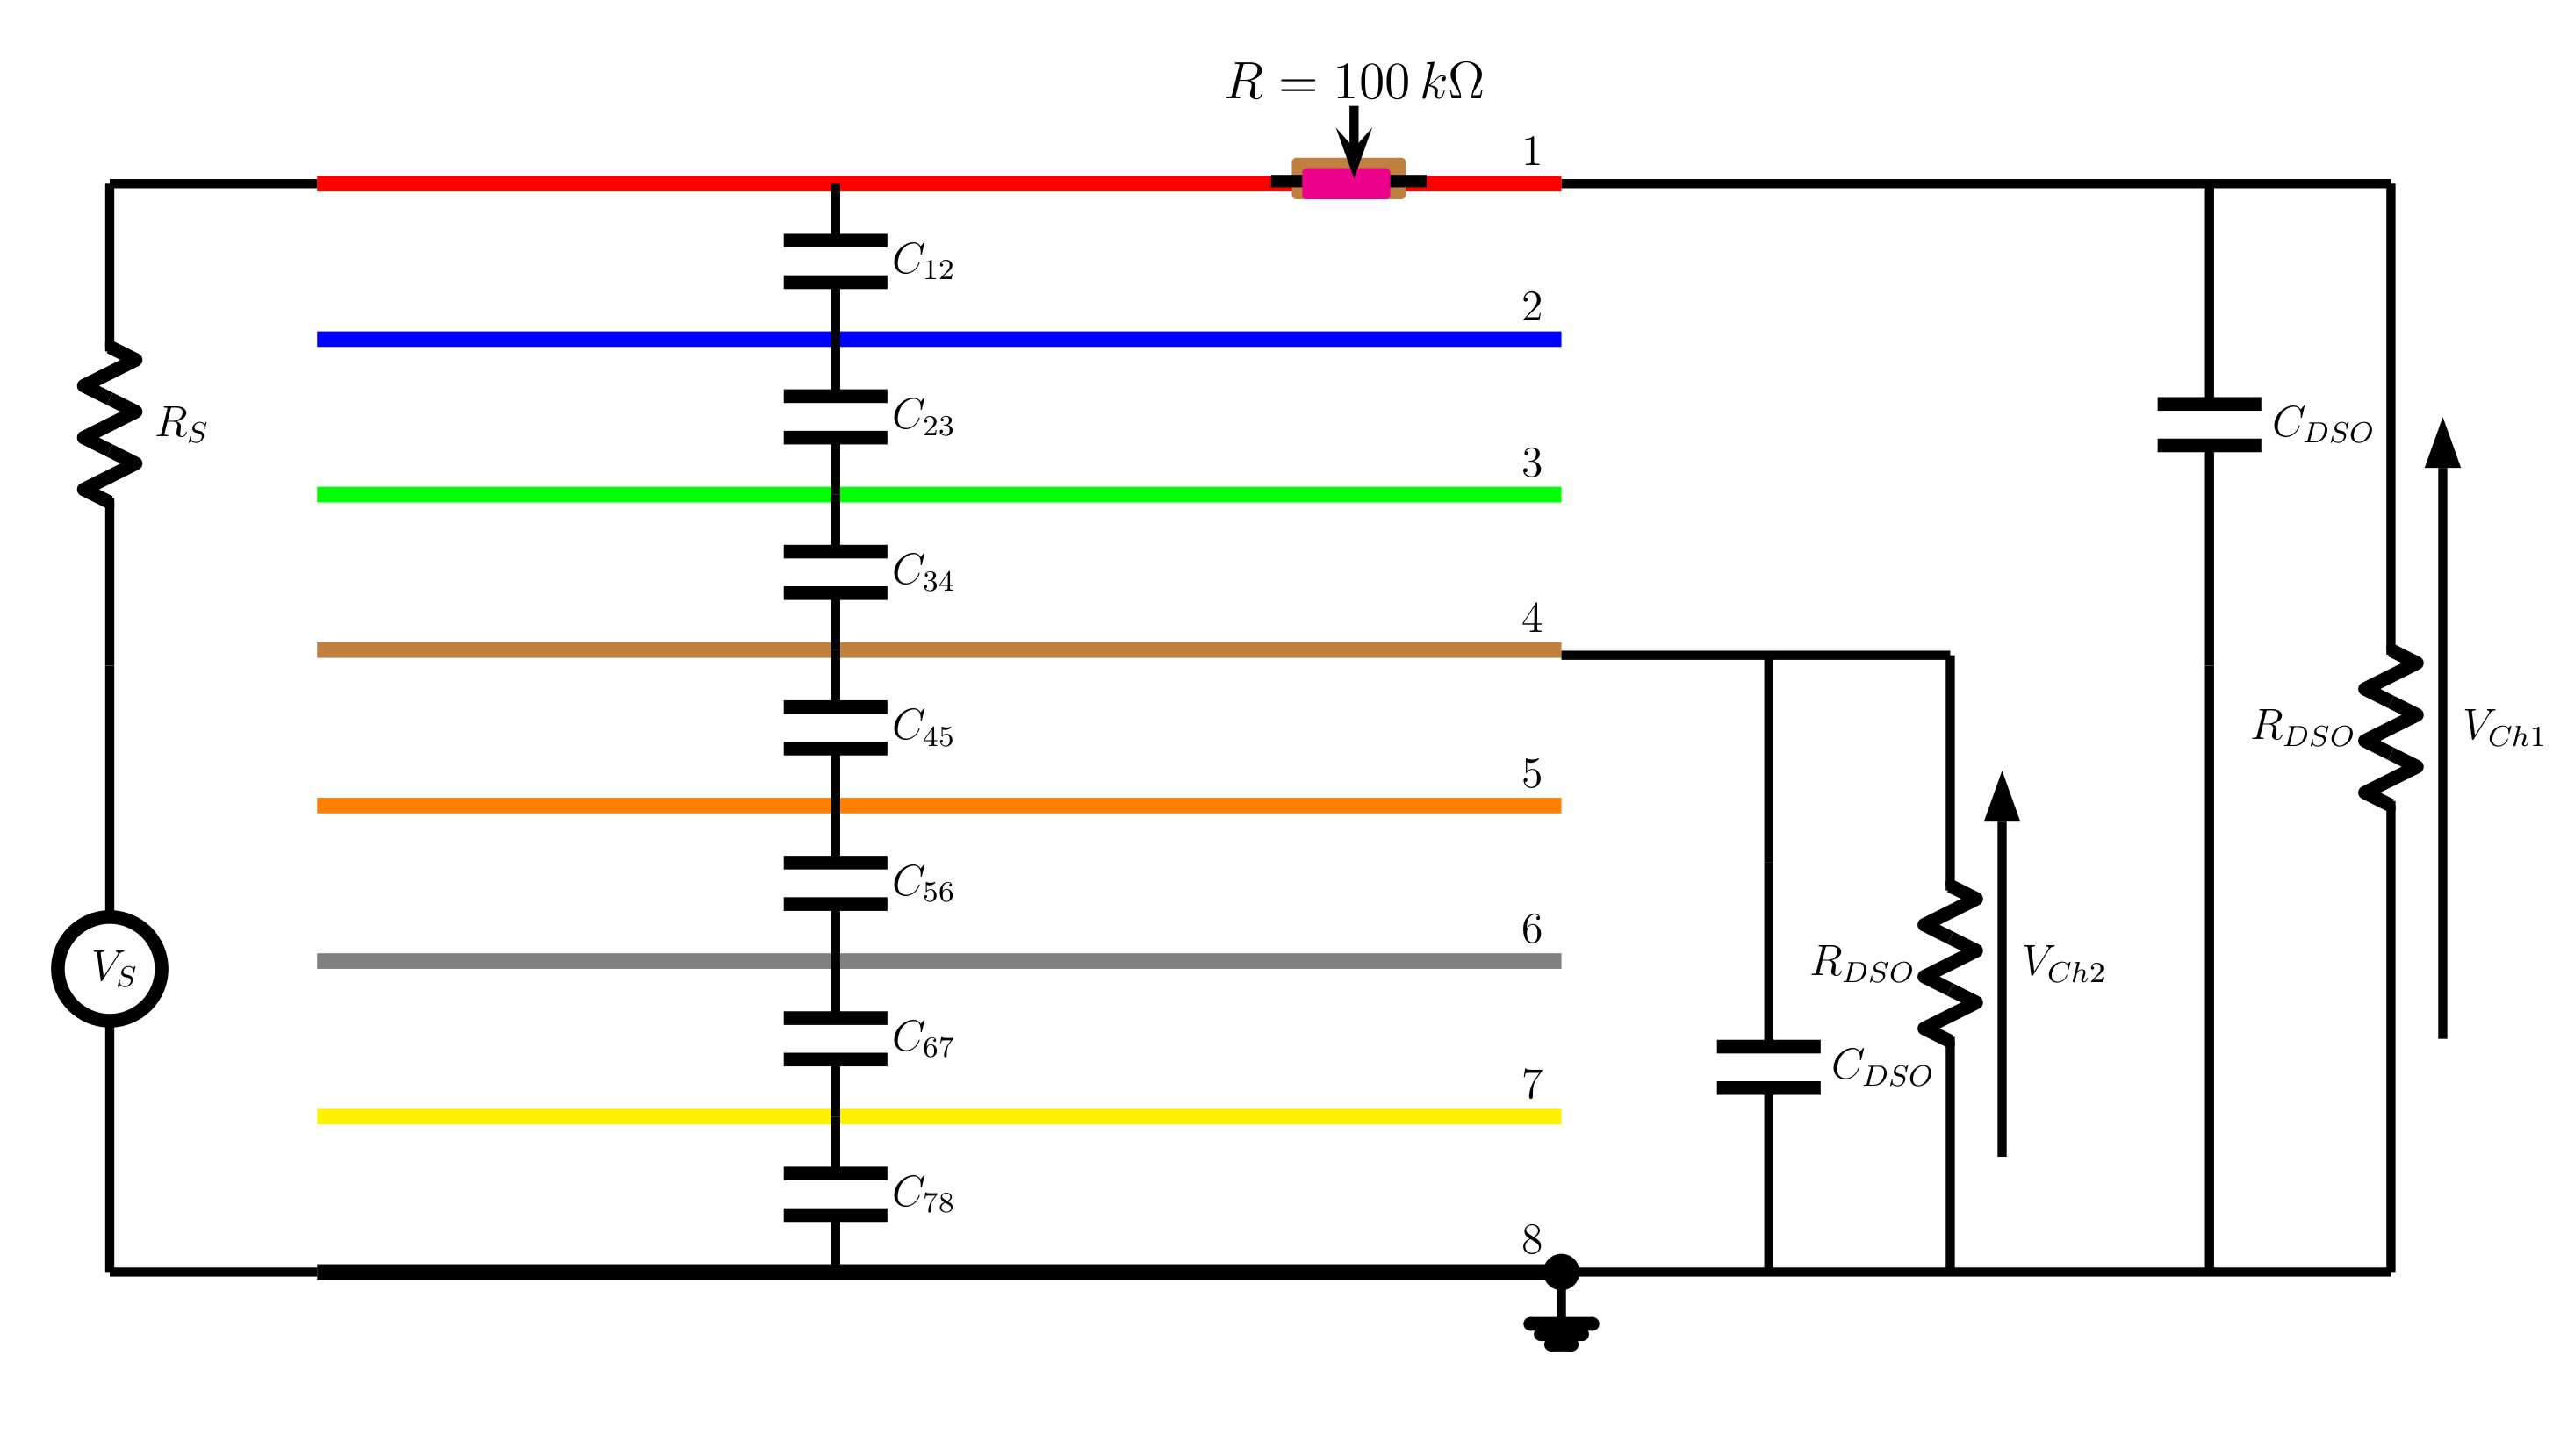 Circuit diagram showing a voltage source with resistance $R_S$ connected to a $100\,k\Omega$ resistor in track 1 and channel 1 of the oscilloscope connected to the other end of track 1. Adjacent tracks are connected by capacitances. Channel 2 of the oscilloscope is connected to track 4. The oscilloscope connections present a load of their input resistance in parallel with their input capacitance.